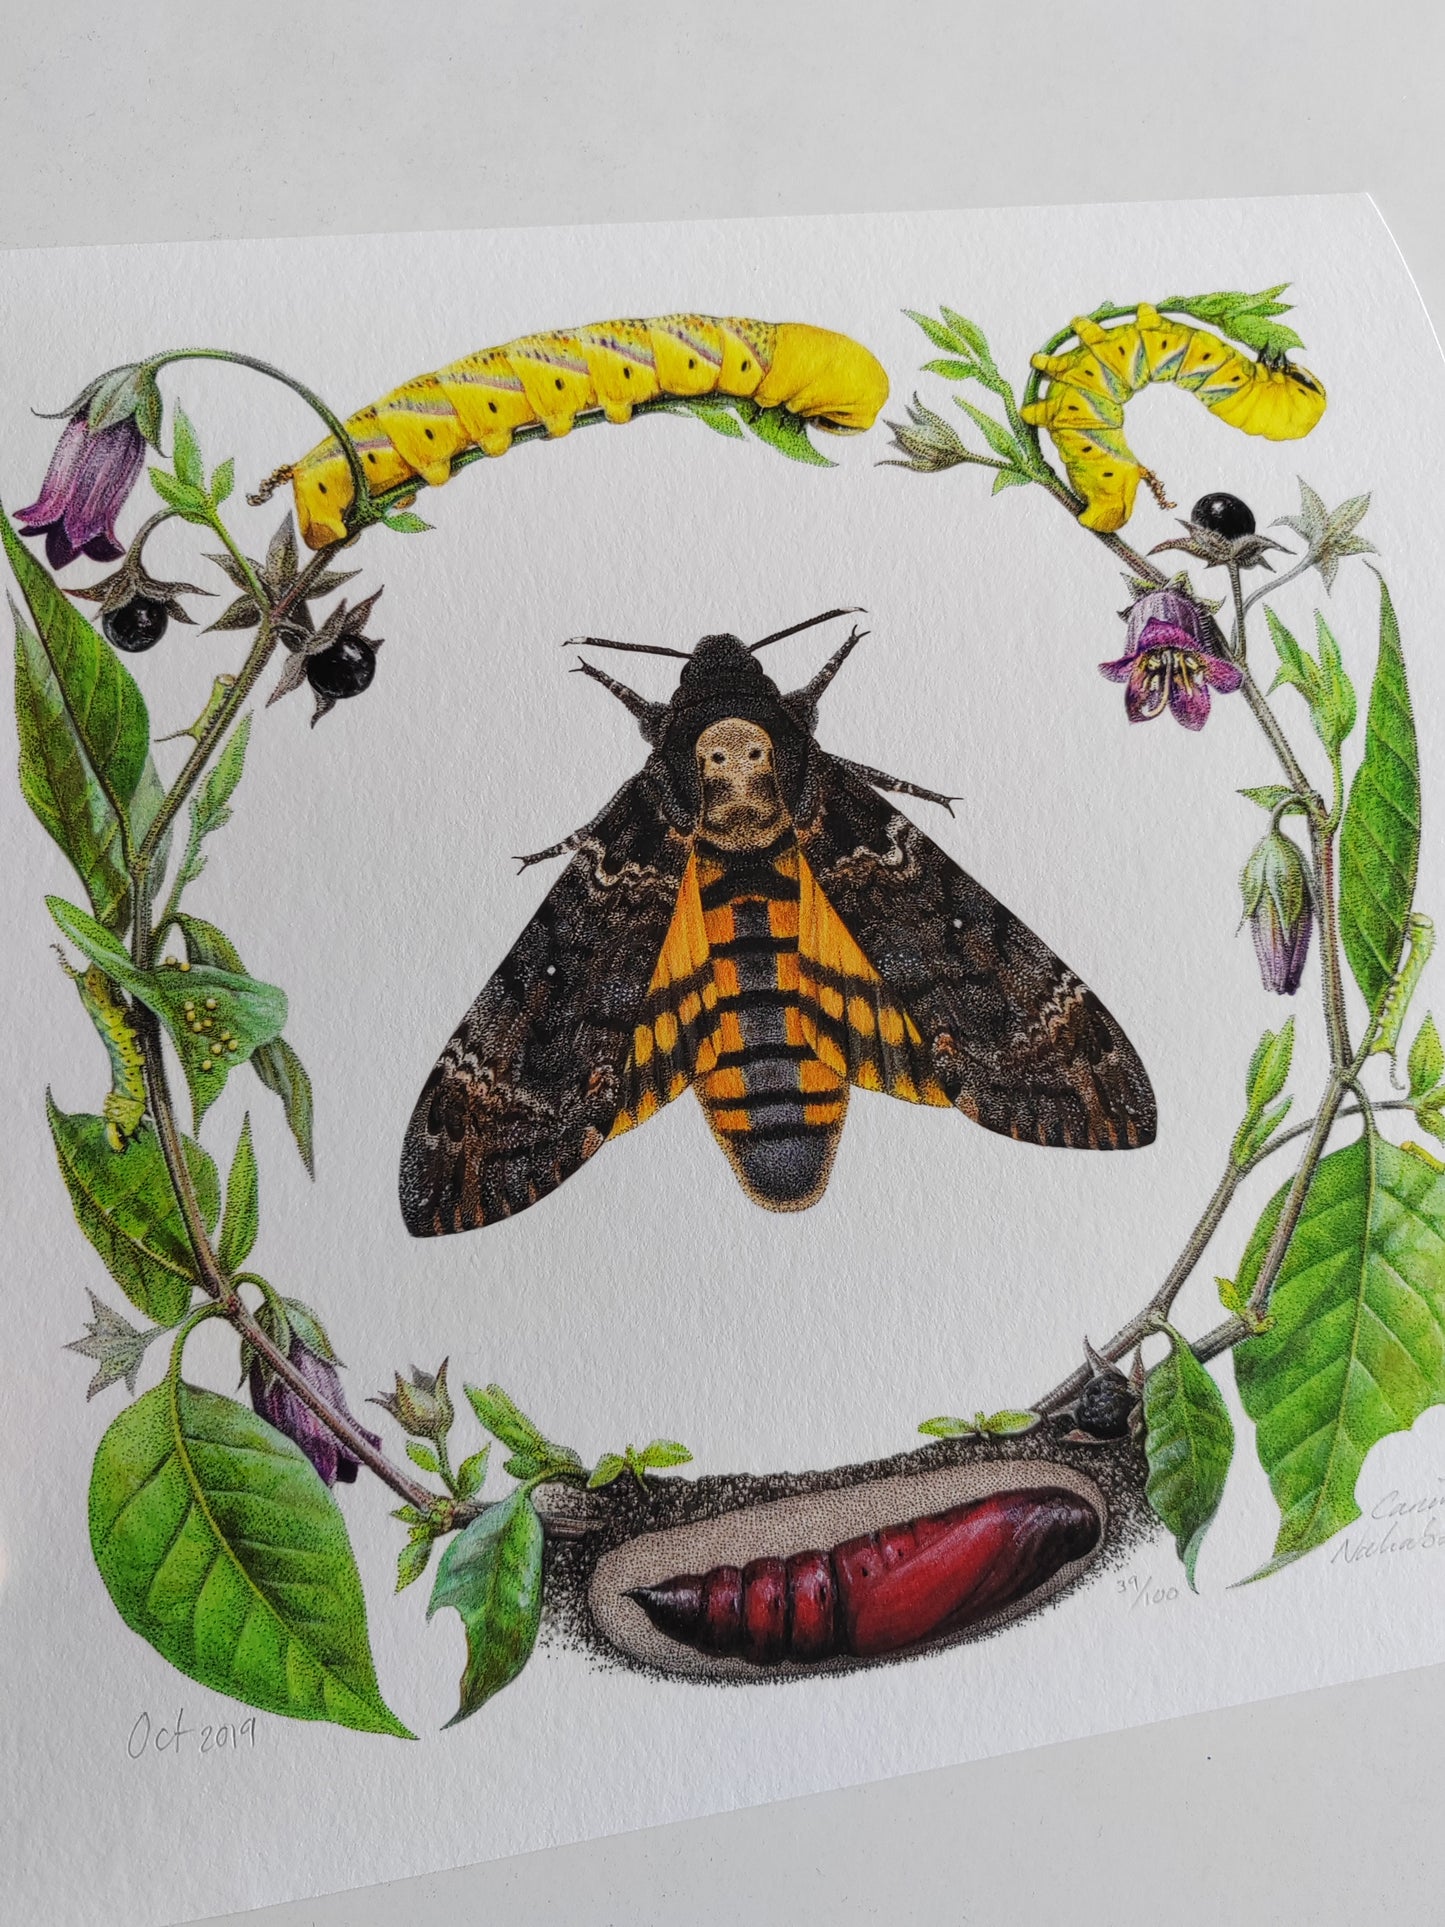 Death's Head Moth lifecycle. Limited edition life-size art print